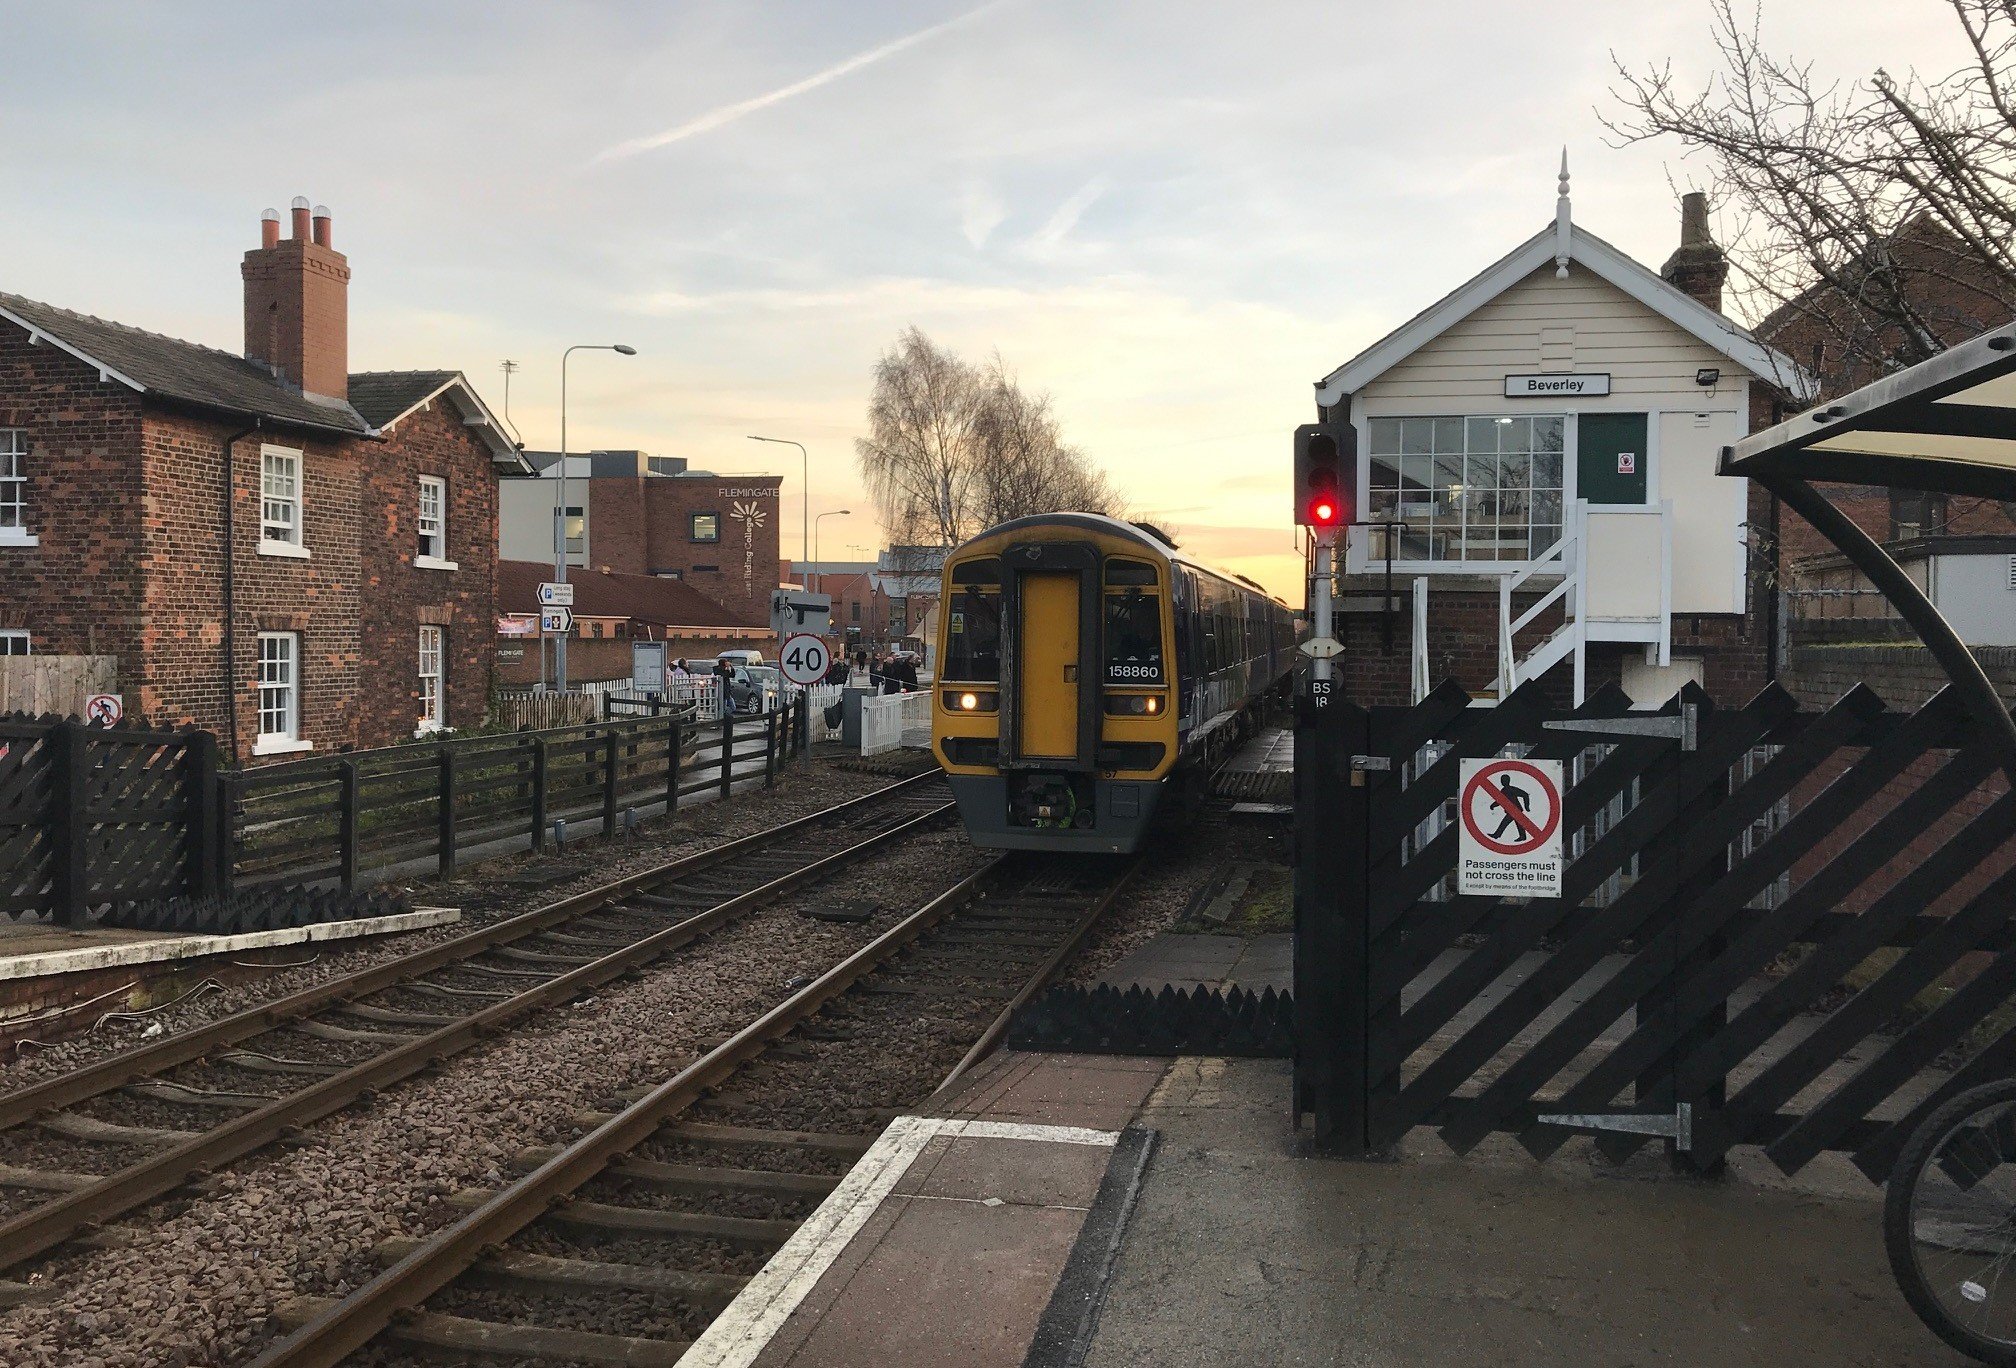 image-shows-northern-train-at-beverley-station